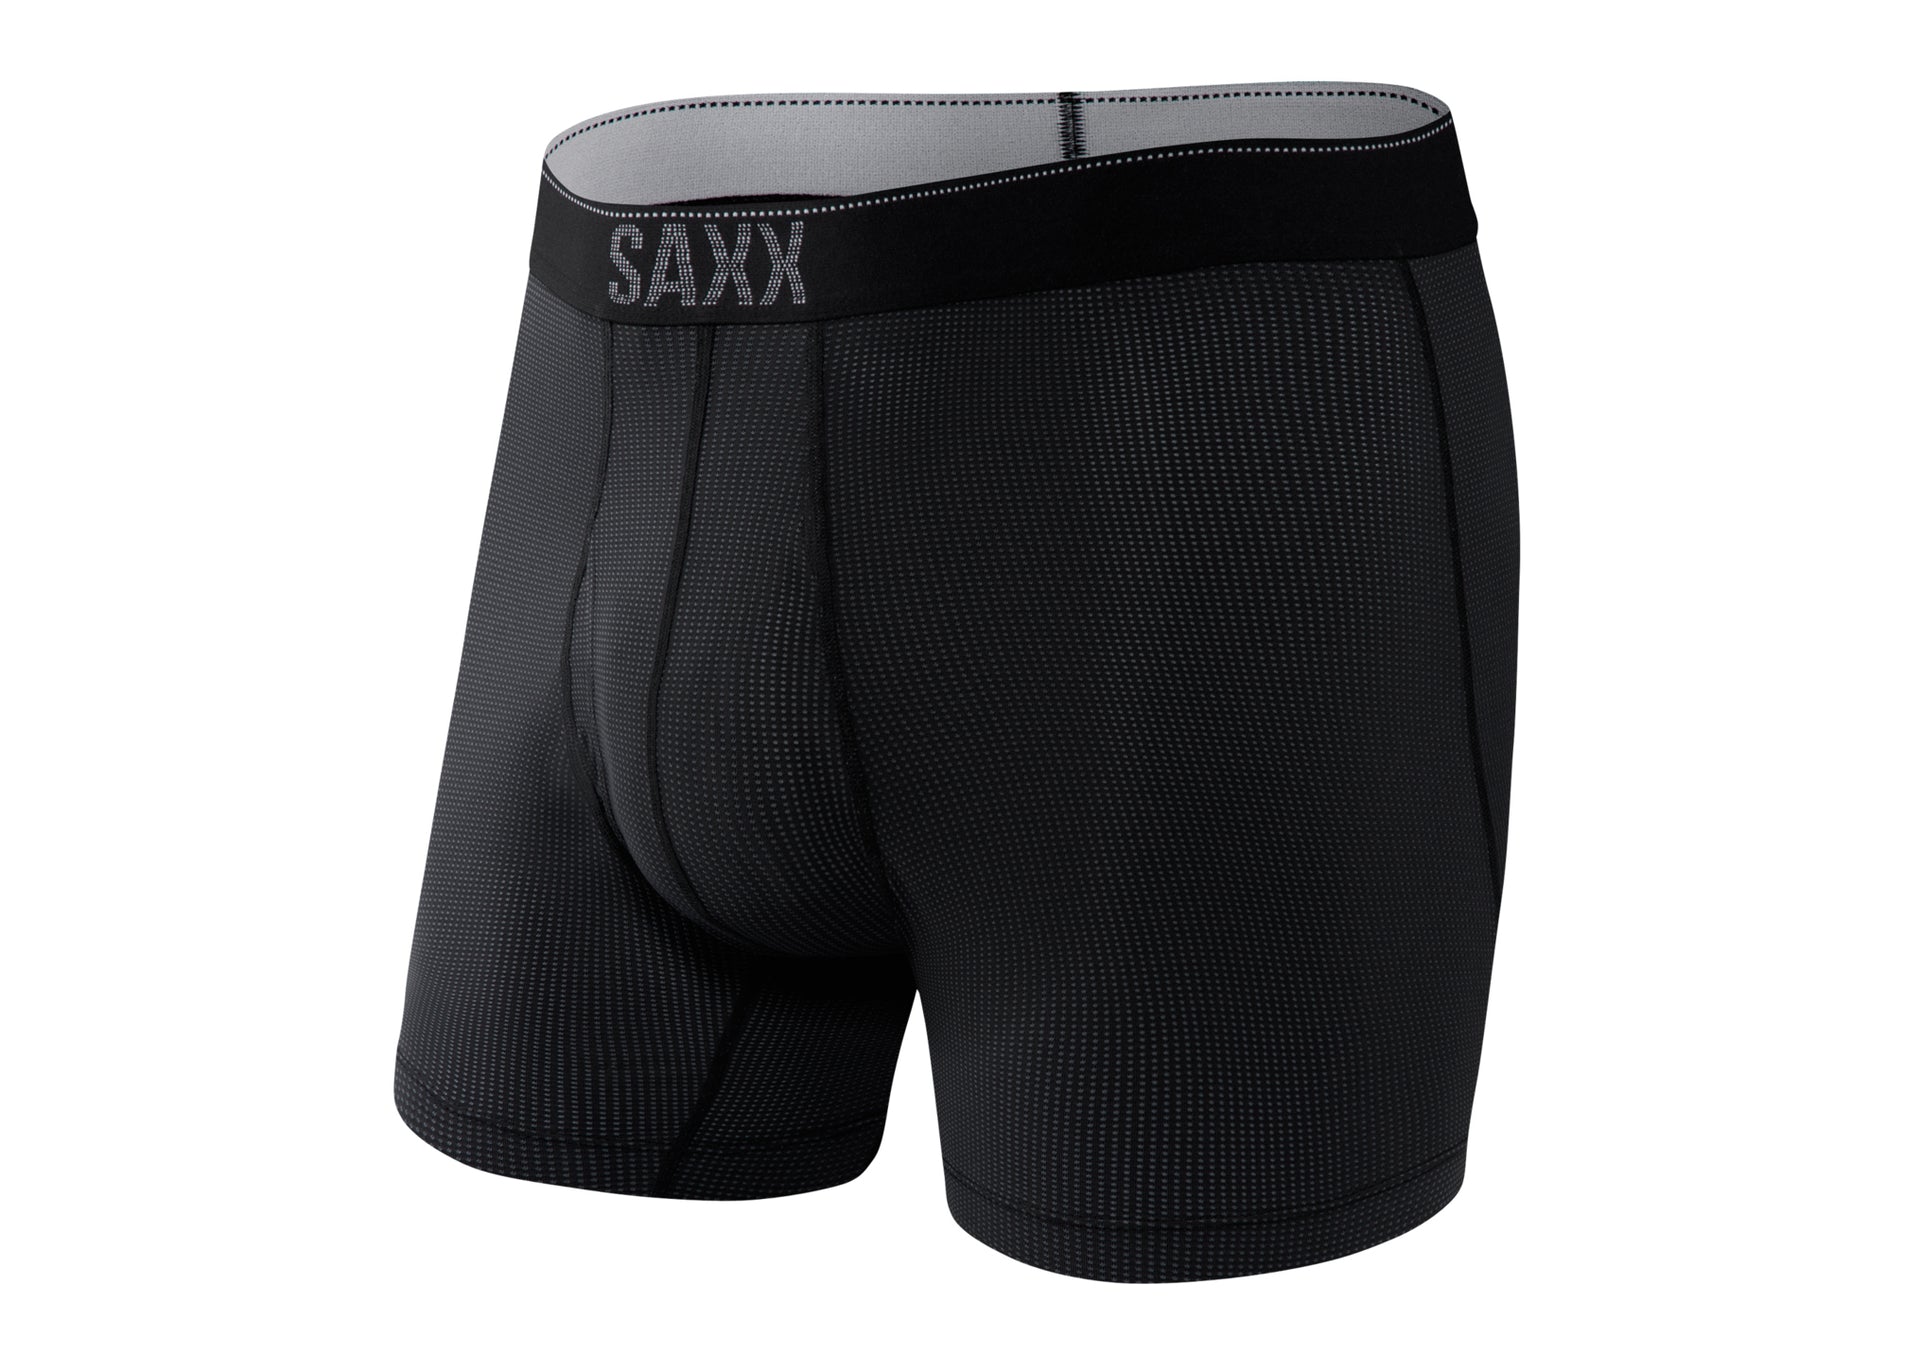  SAXX Men's Underwear – VIBE Super Soft Trunk Briefs with  Built-In Pouch Support, Underwear for Men, Pack of 3, Black/Grey/Navy,  X-Small : Clothing, Shoes & Jewelry